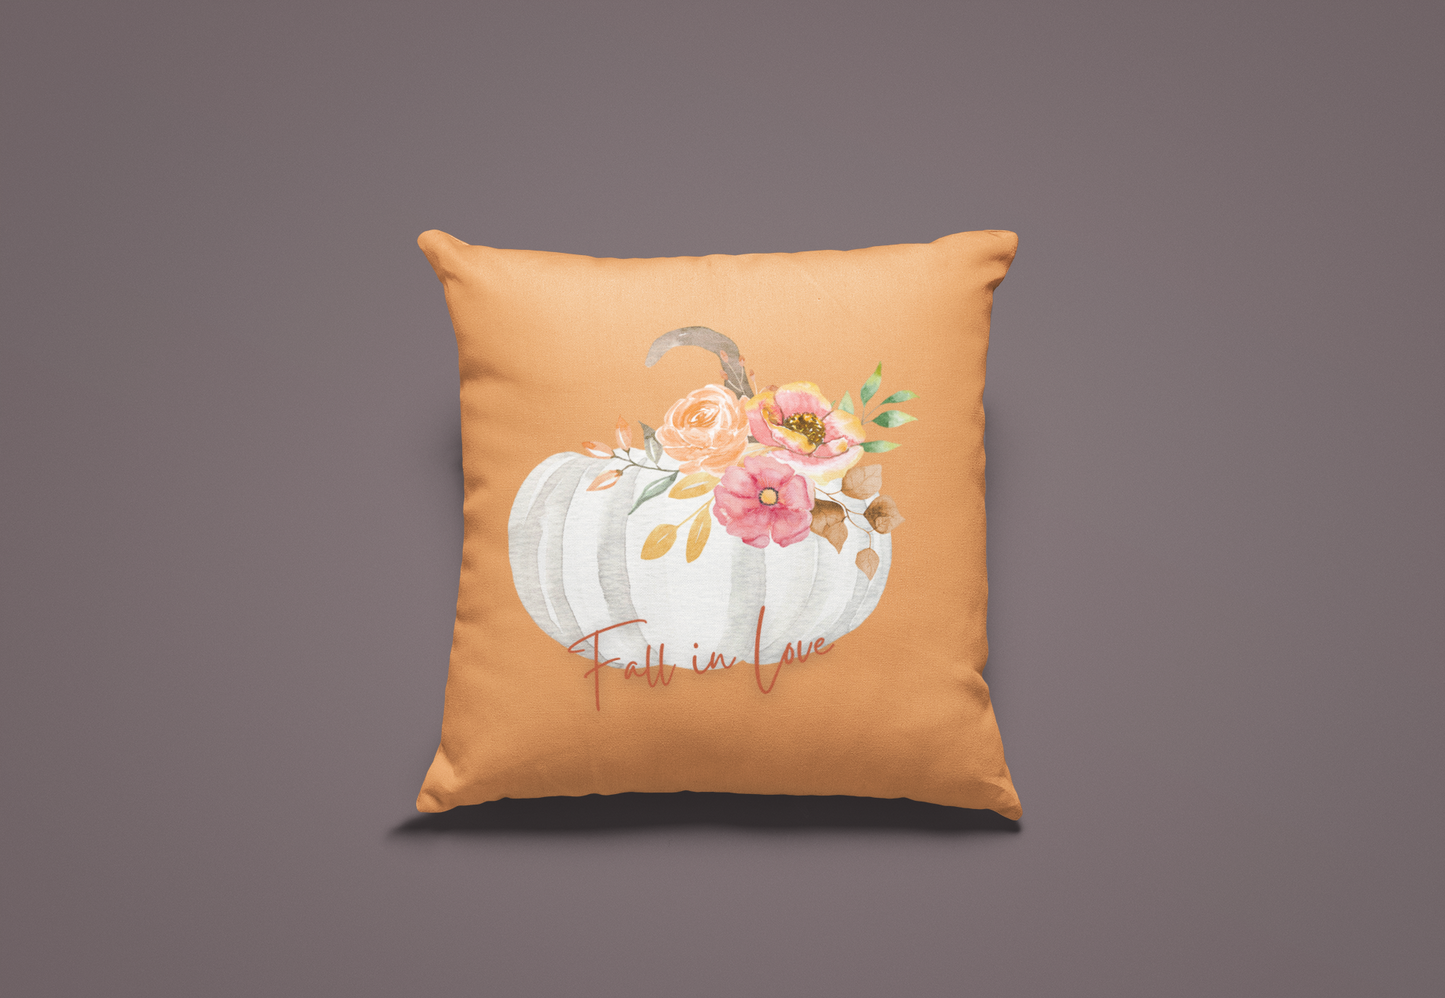 "Fall In Love" 12x12" Pillow Cover